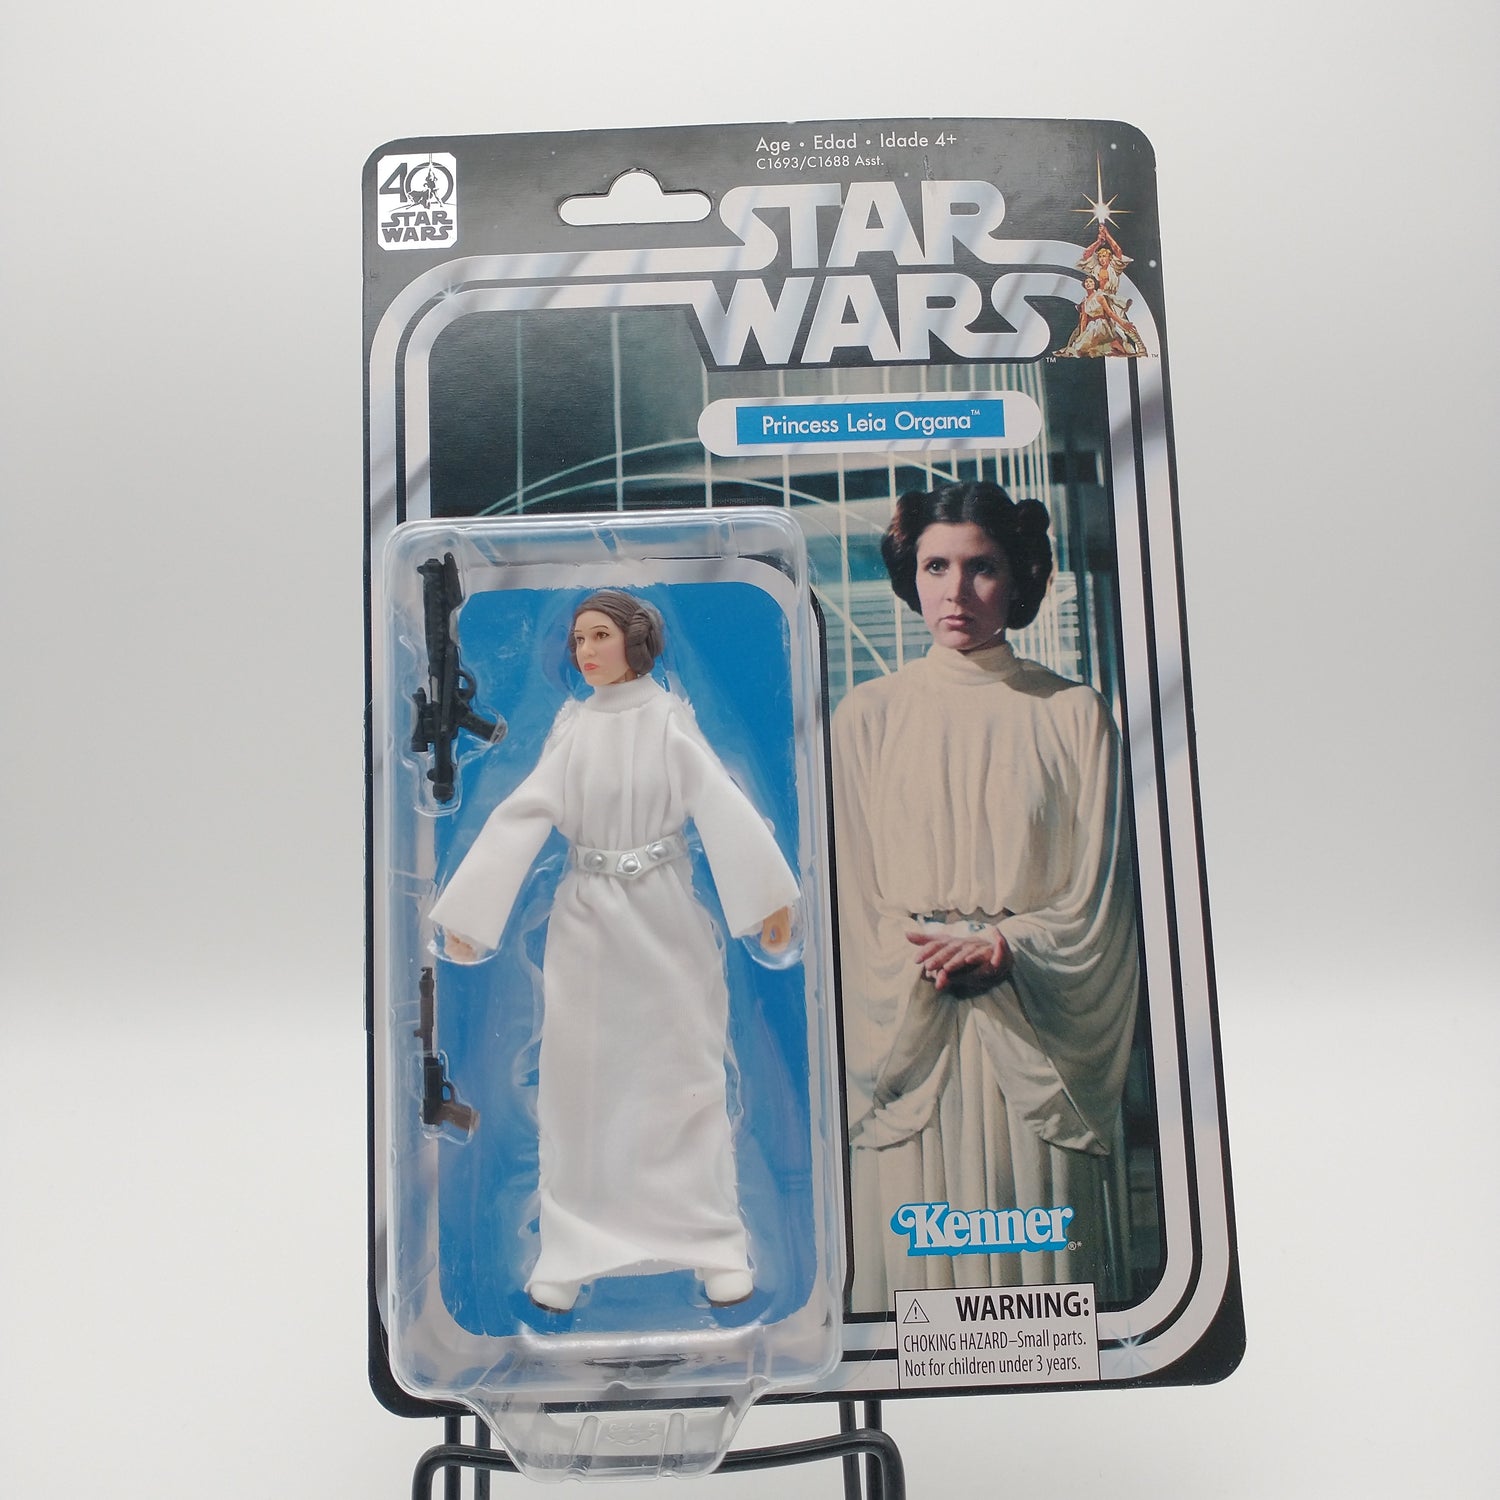 The front of the cart and bubble are sealed and undamaged. Inside the bubble is a woman action figure wearing long white robes and a silver belt. She has brown hair. Next to her in the bubble is two guns. 